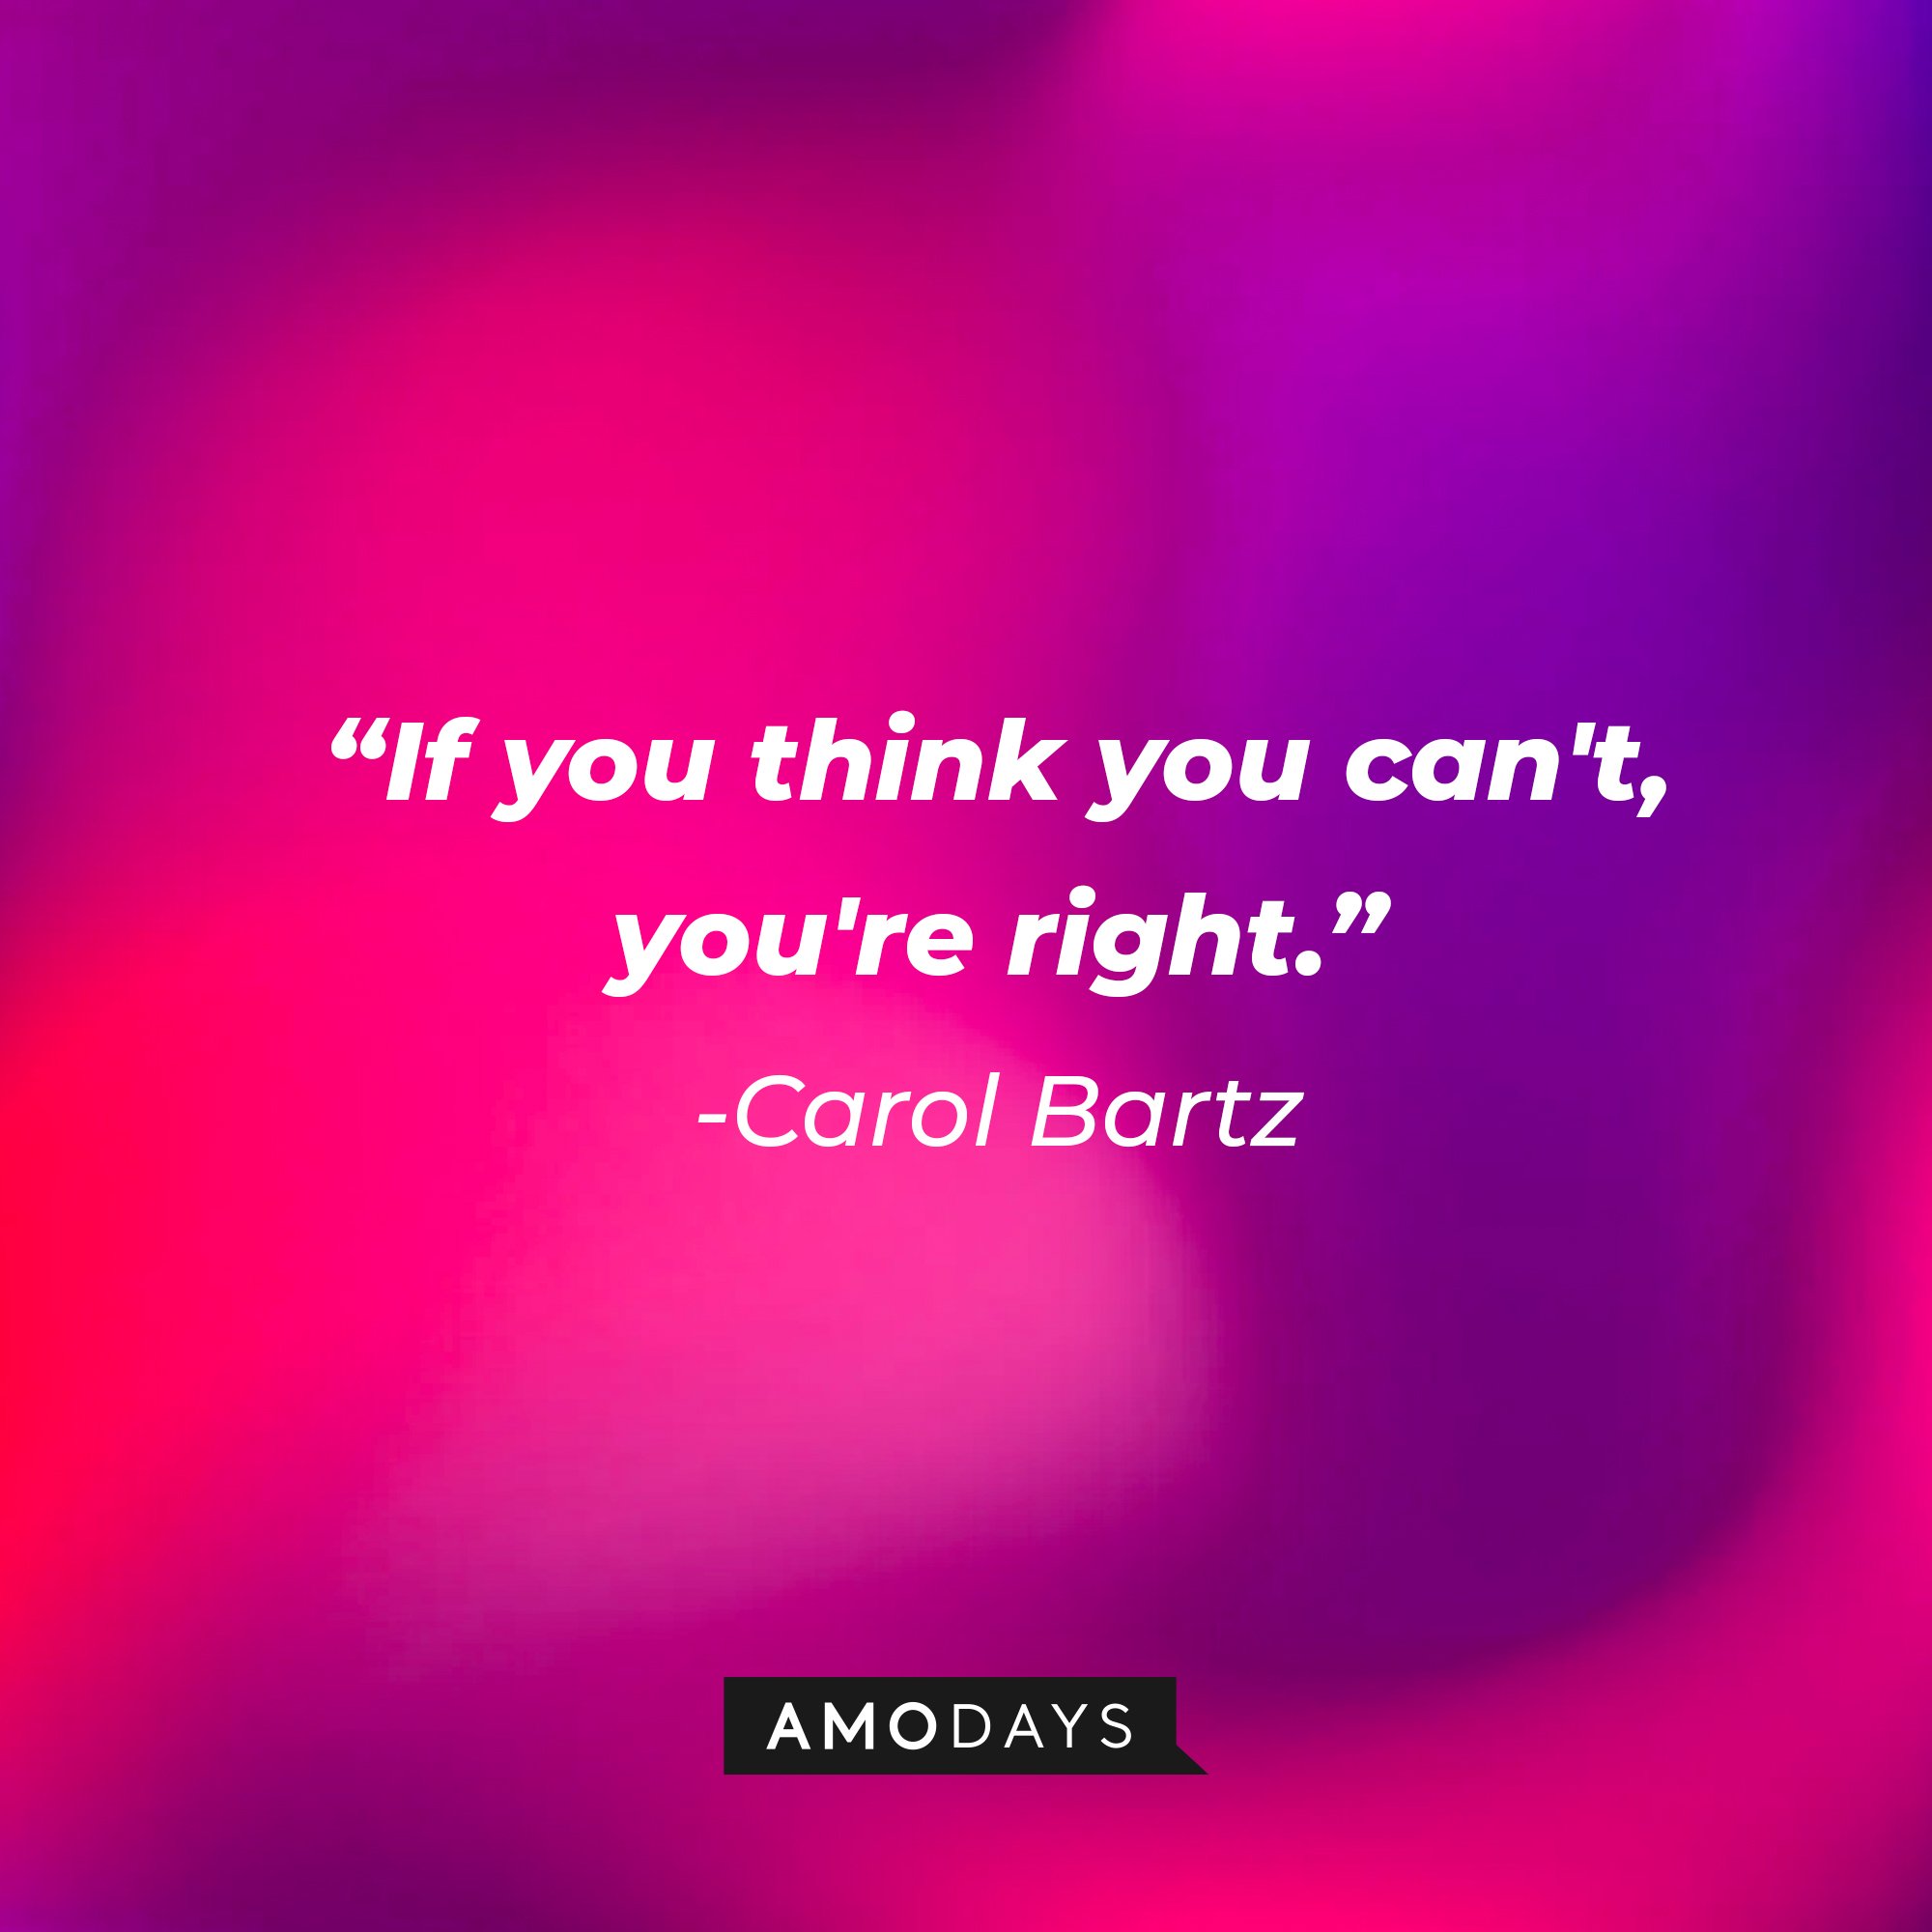 Carol Bartz’ quote: "If you think you can't, you're right." | Image: AmoDays